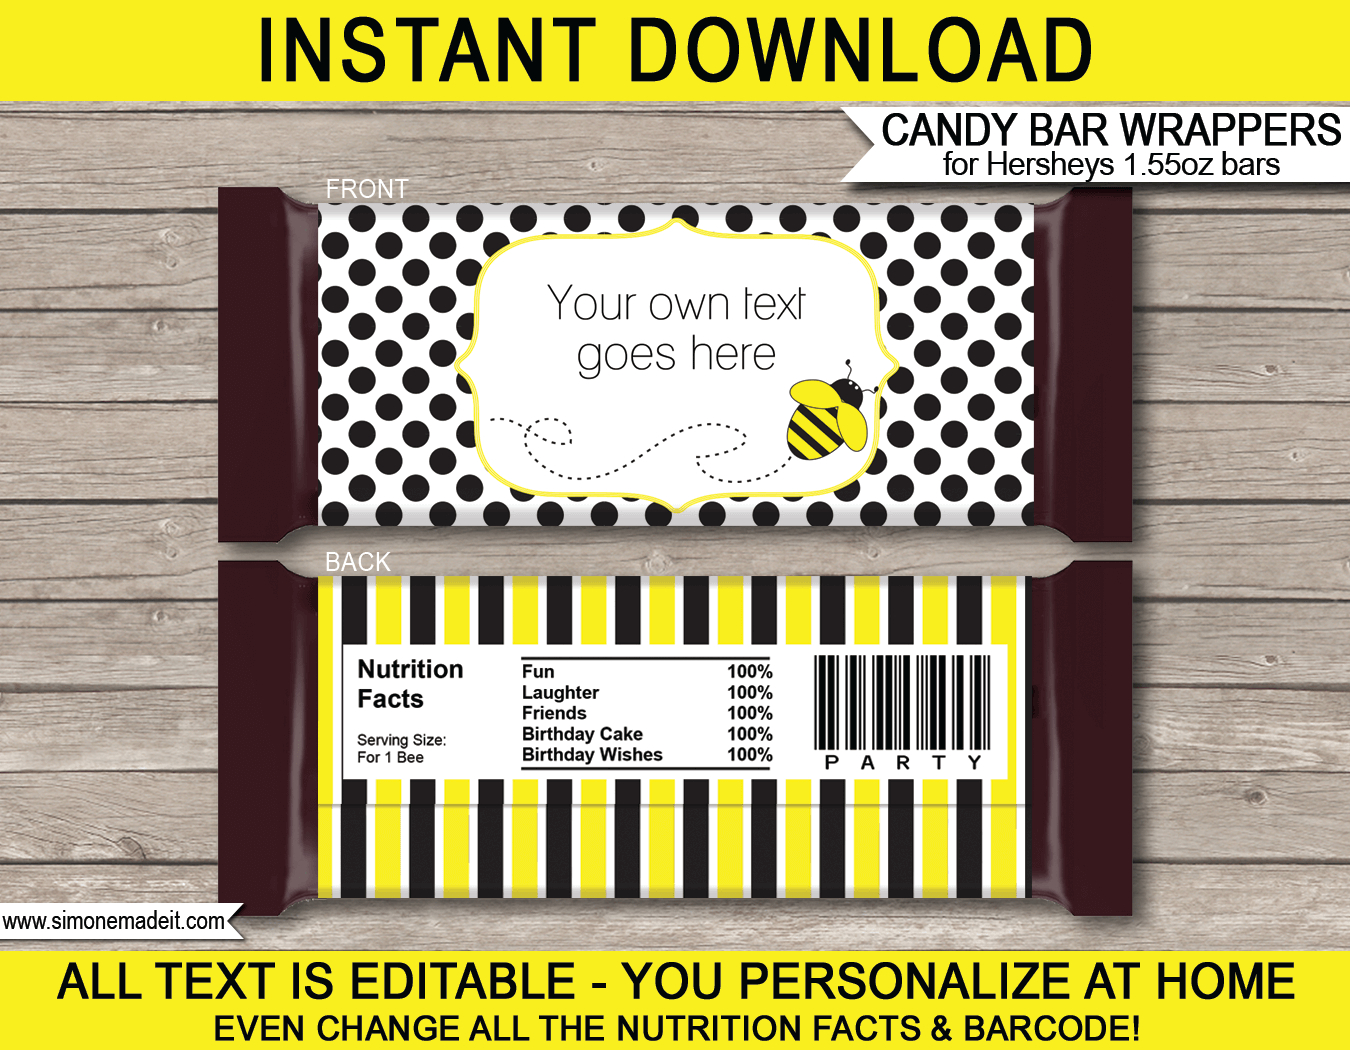 Bee Hershey Candy Bar Wrappers | Personalized Candy Bars - Free Printable Candy Bar Wrappers